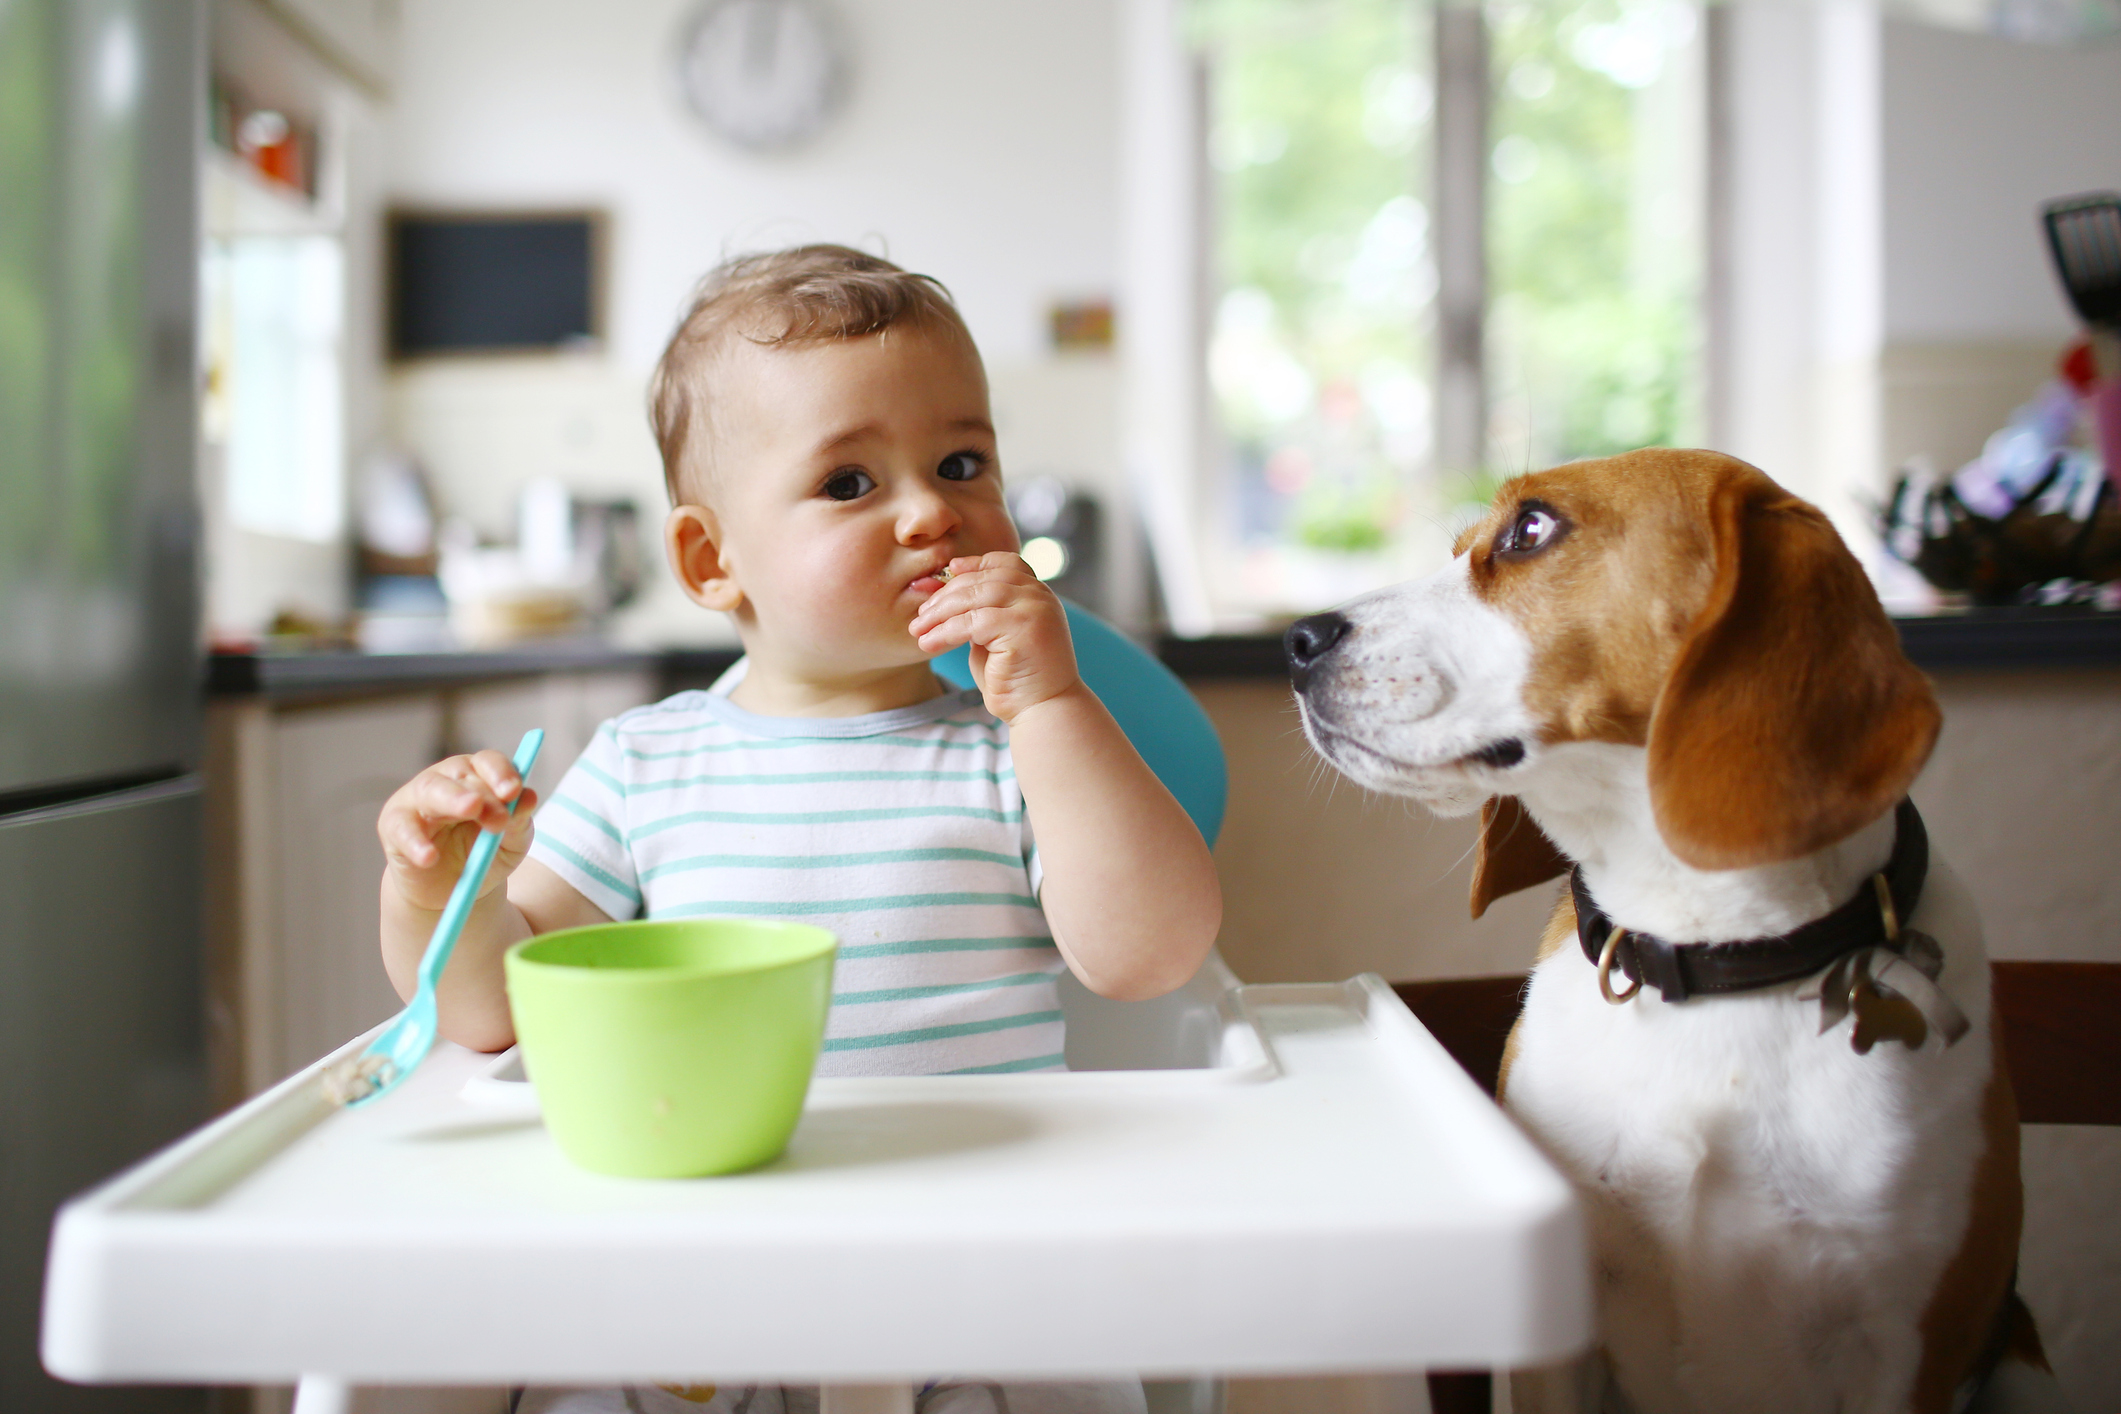 Baby hits in their high chair while a dog looks at them with envy! 